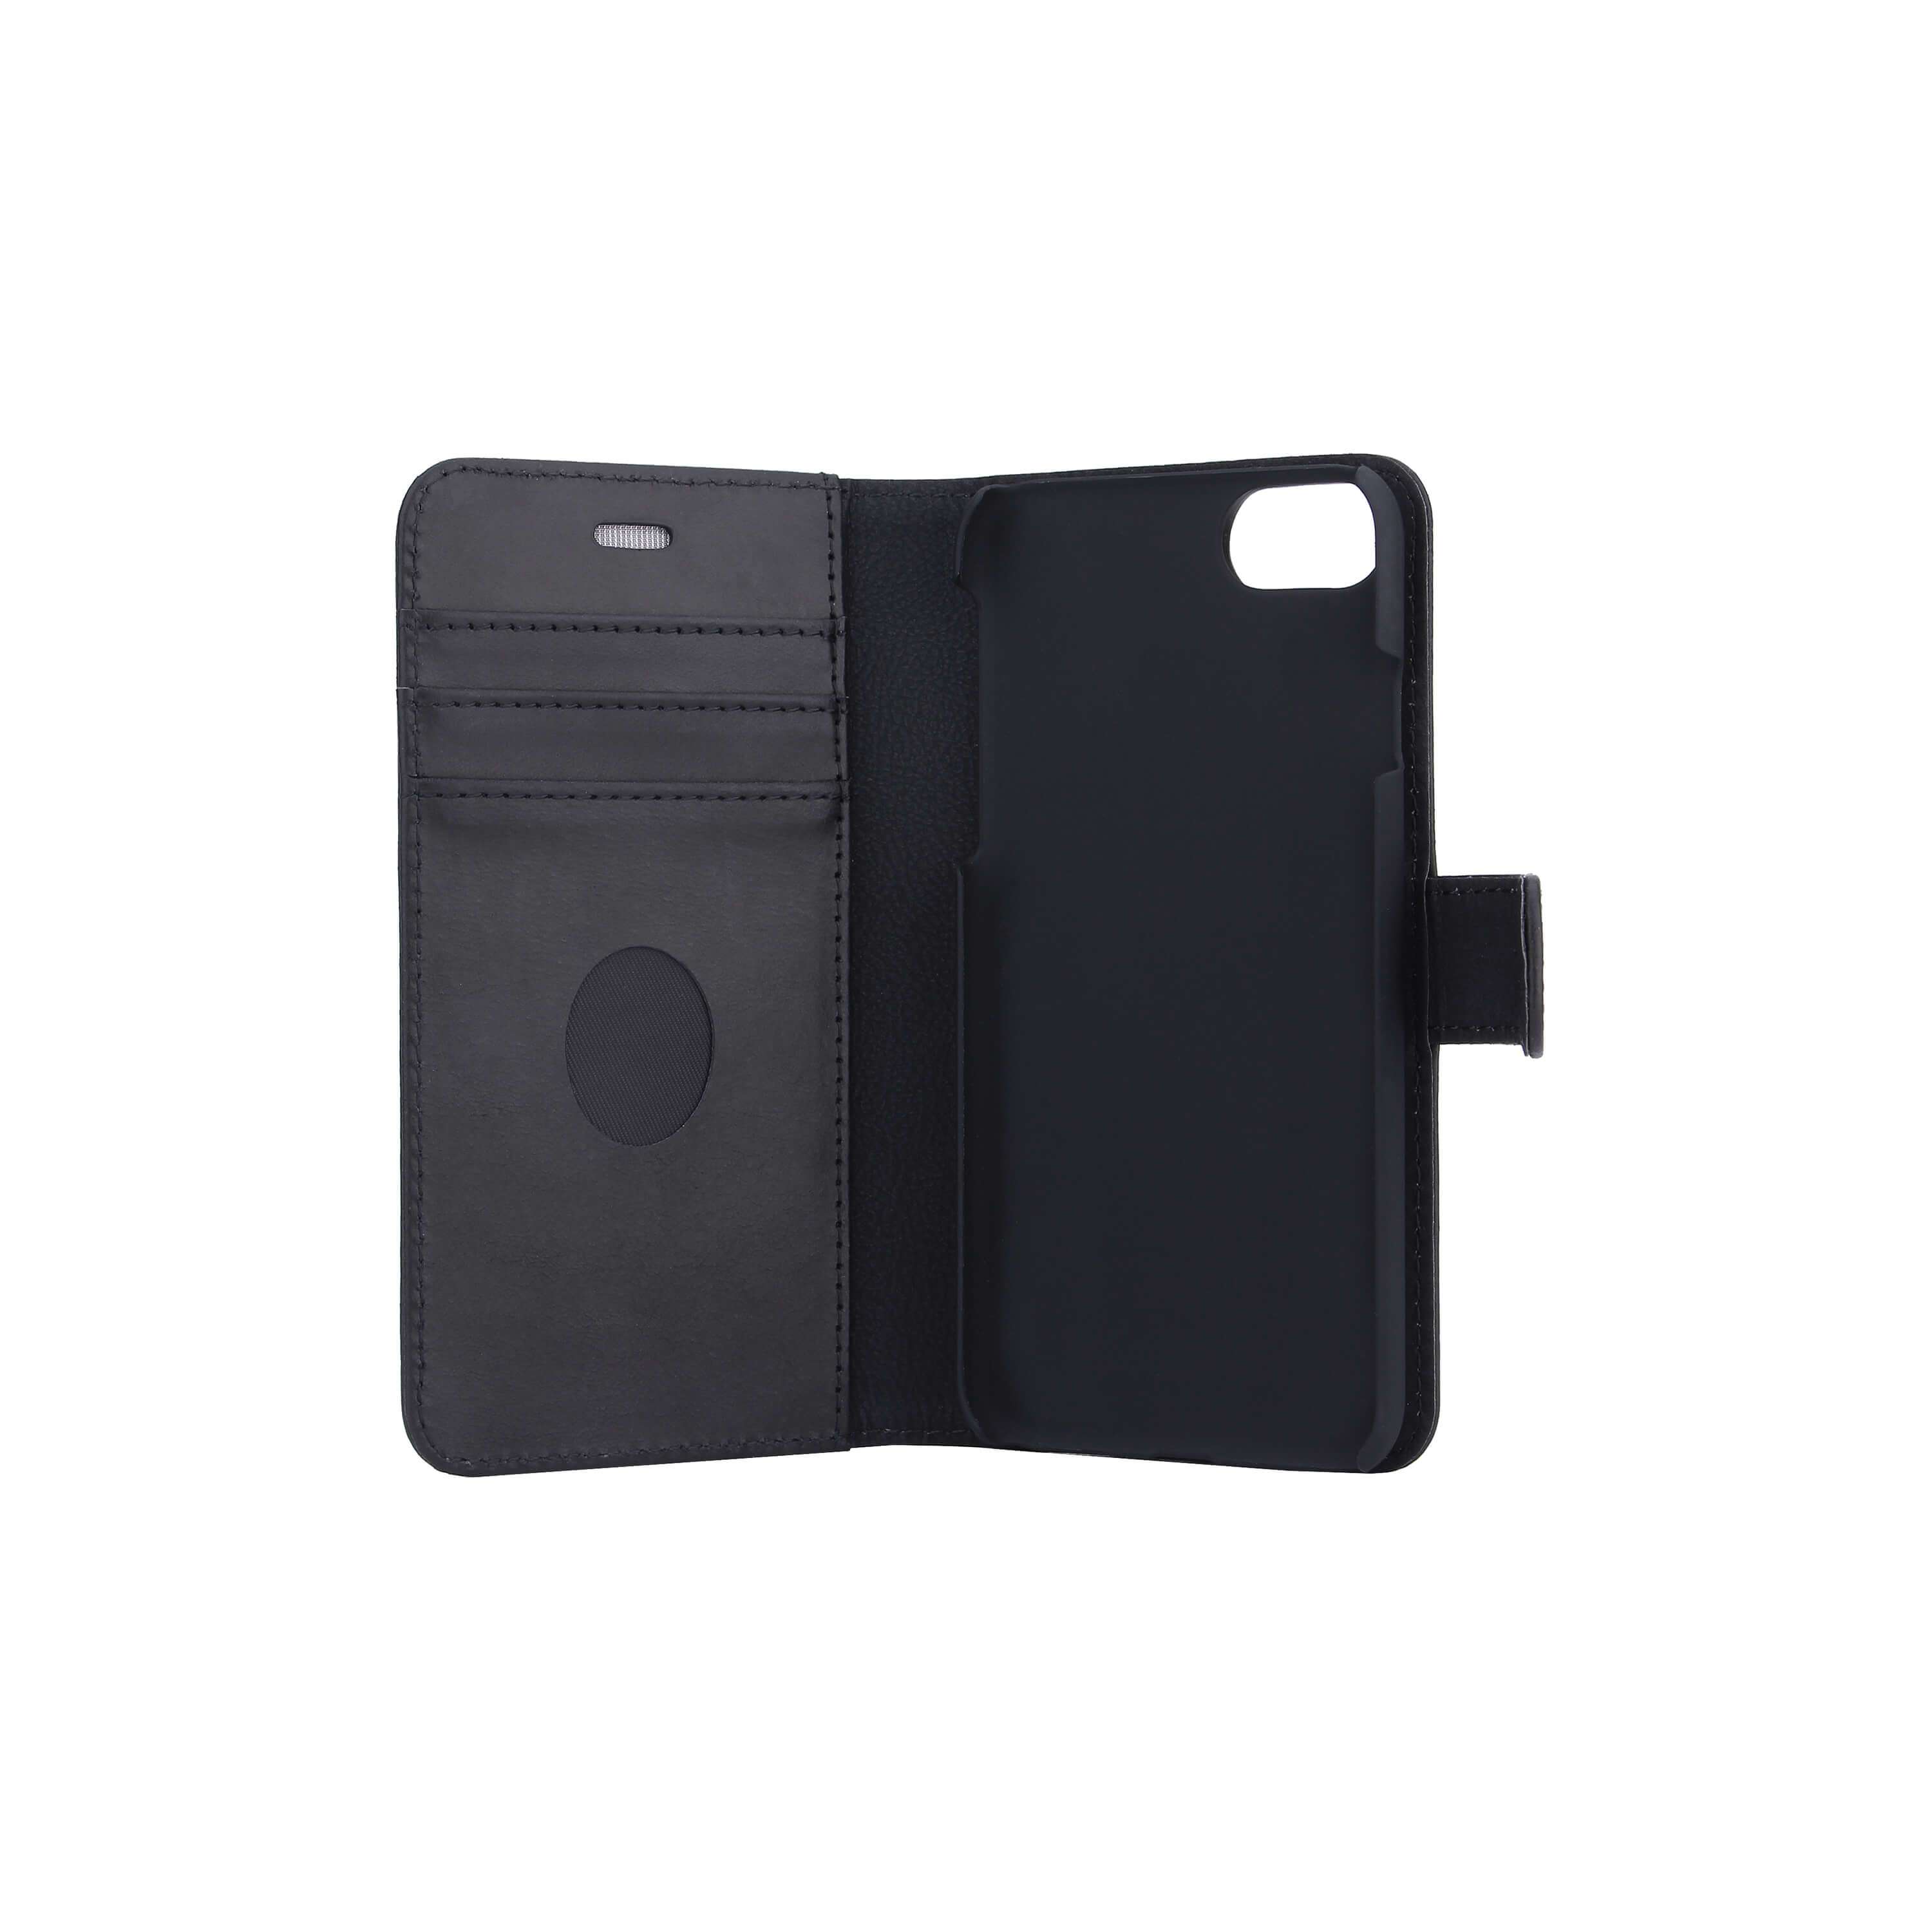 Radicover - Radiation protection wallet Leather iPhone 6/7/8  Plus Exclusive 2in1